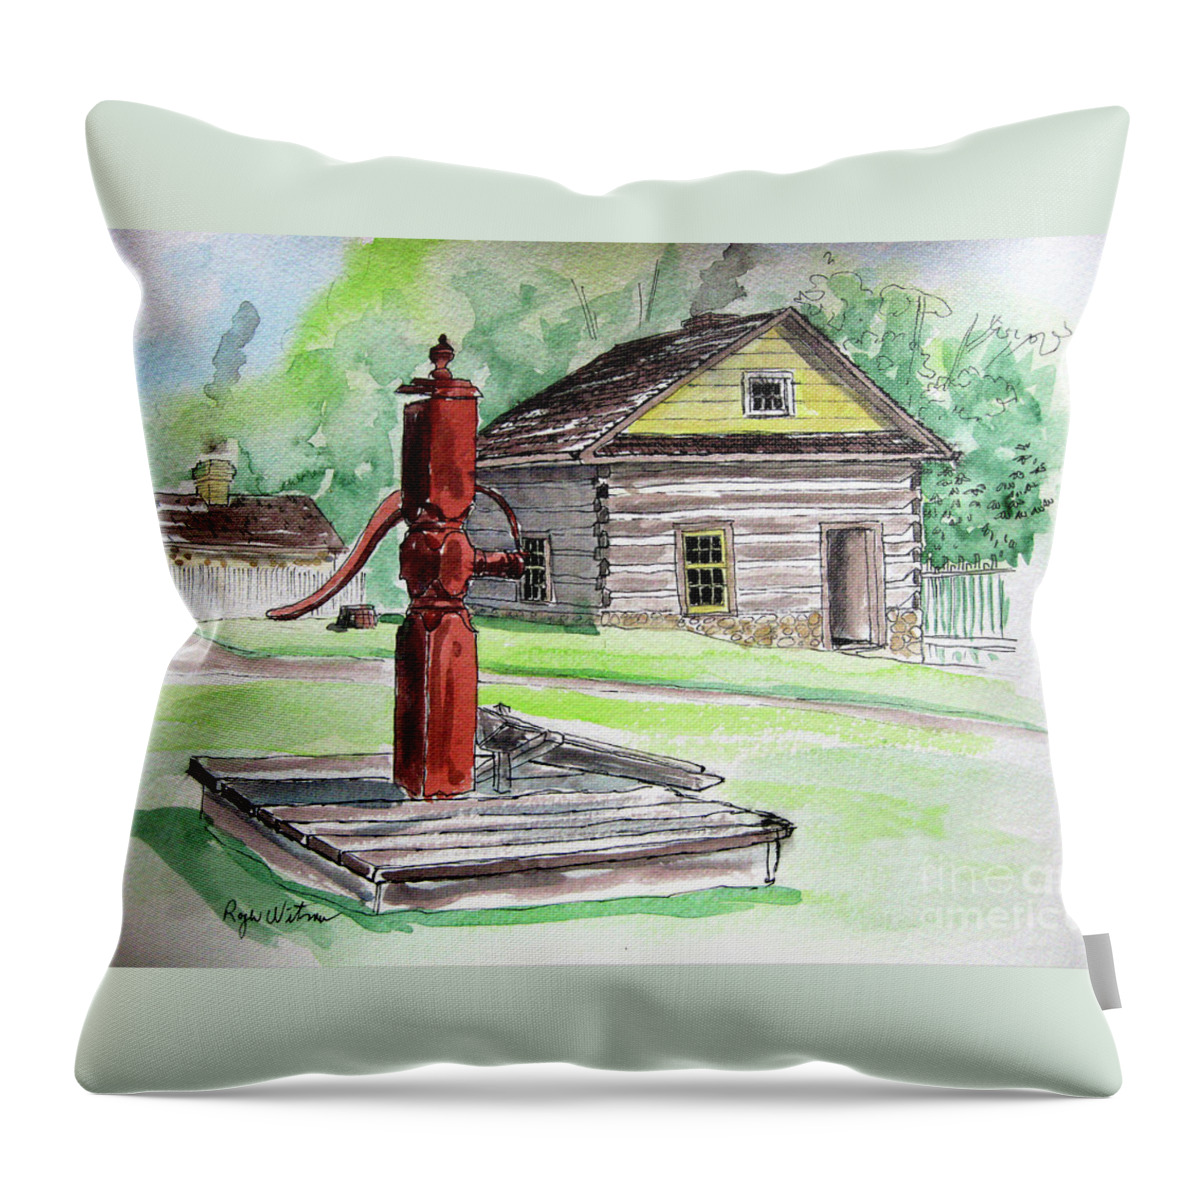  Throw Pillow featuring the painting Ye Olde Pump by Roger Witmer